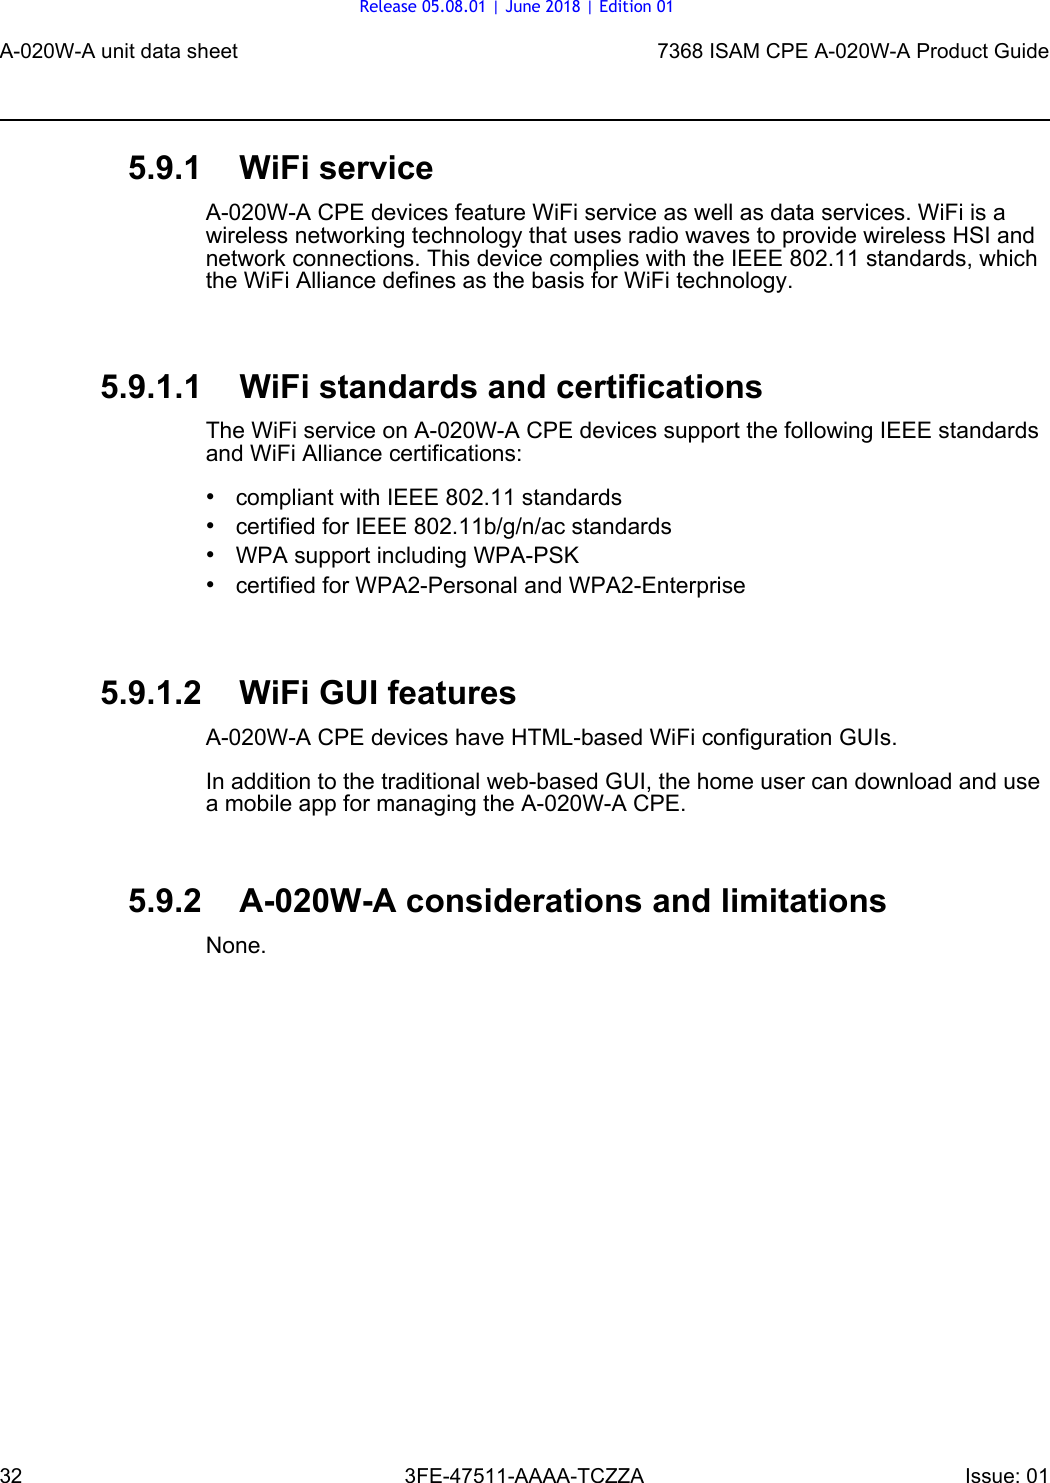 A-020W-A unit data sheet327368 ISAM CPE A-020W-A Product Guide3FE-47511-AAAA-TCZZA Issue: 01 5.9.1 WiFi serviceA-020W-A CPE devices feature WiFi service as well as data services. WiFi is a wireless networking technology that uses radio waves to provide wireless HSI and network connections. This device complies with the IEEE 802.11 standards, which the WiFi Alliance defines as the basis for WiFi technology.5.9.1.1 WiFi standards and certificationsThe WiFi service on A-020W-A CPE devices support the following IEEE standards and WiFi Alliance certifications:•compliant with IEEE 802.11 standards•certified for IEEE 802.11b/g/n/ac standards •WPA support including WPA-PSK•certified for WPA2-Personal and WPA2-Enterprise5.9.1.2 WiFi GUI featuresA-020W-A CPE devices have HTML-based WiFi configuration GUIs. In addition to the traditional web-based GUI, the home user can download and use a mobile app for managing the A-020W-A CPE.5.9.2 A-020W-A considerations and limitationsNone.Release 05.08.01 | June 2018 | Edition 01